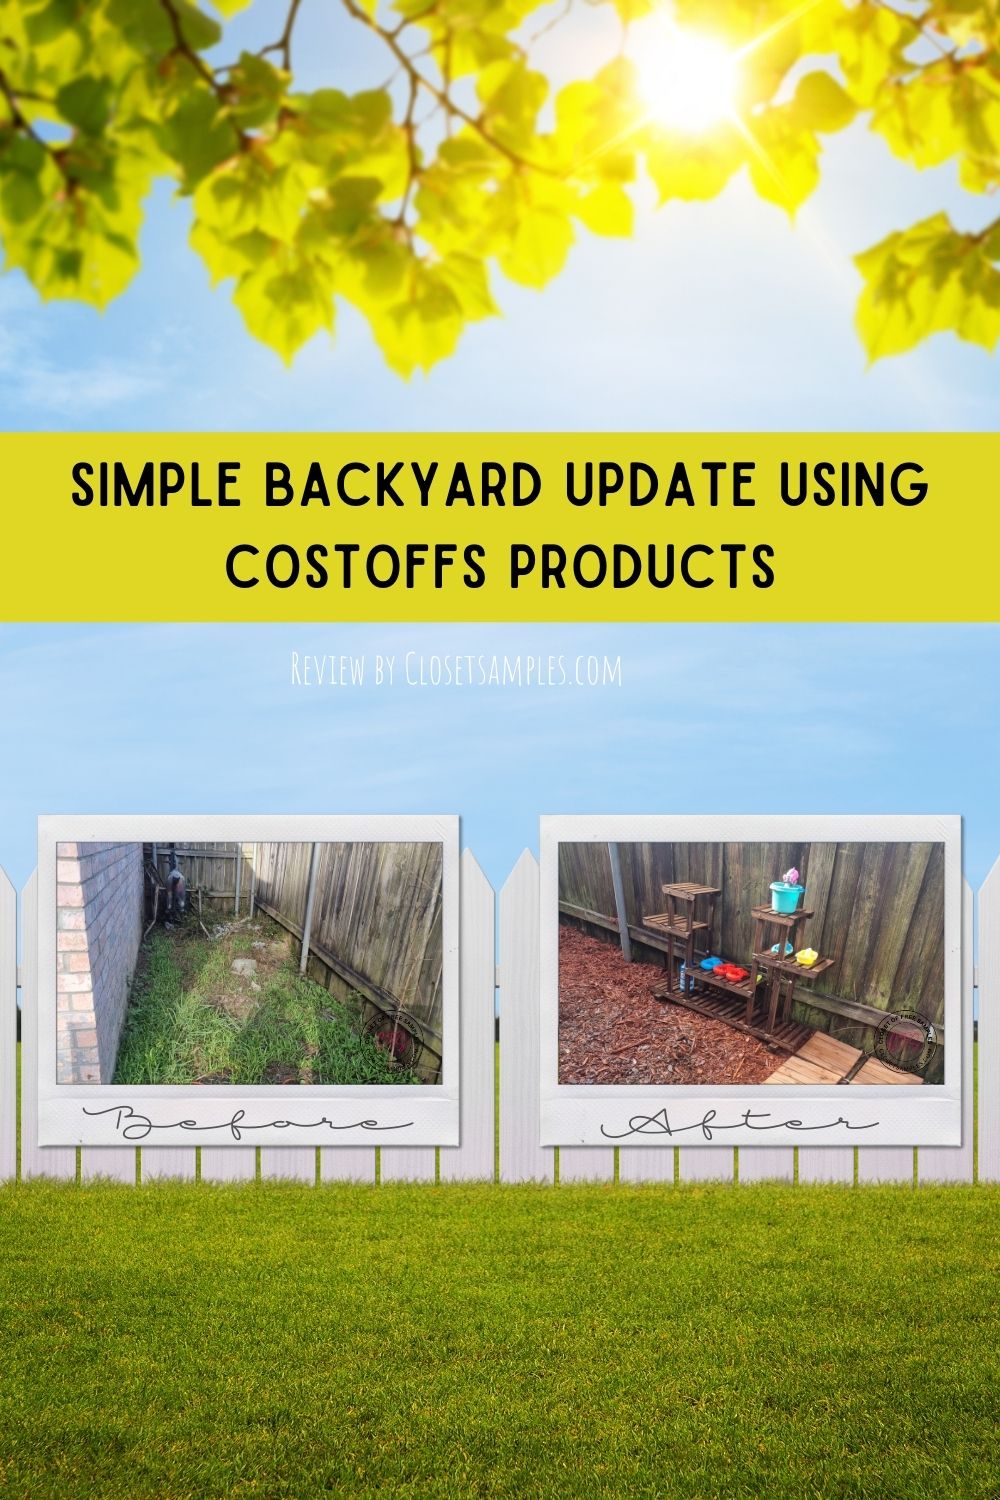 Simple Backyard Update Using Costoffs Products A Review closetsamples pinterest